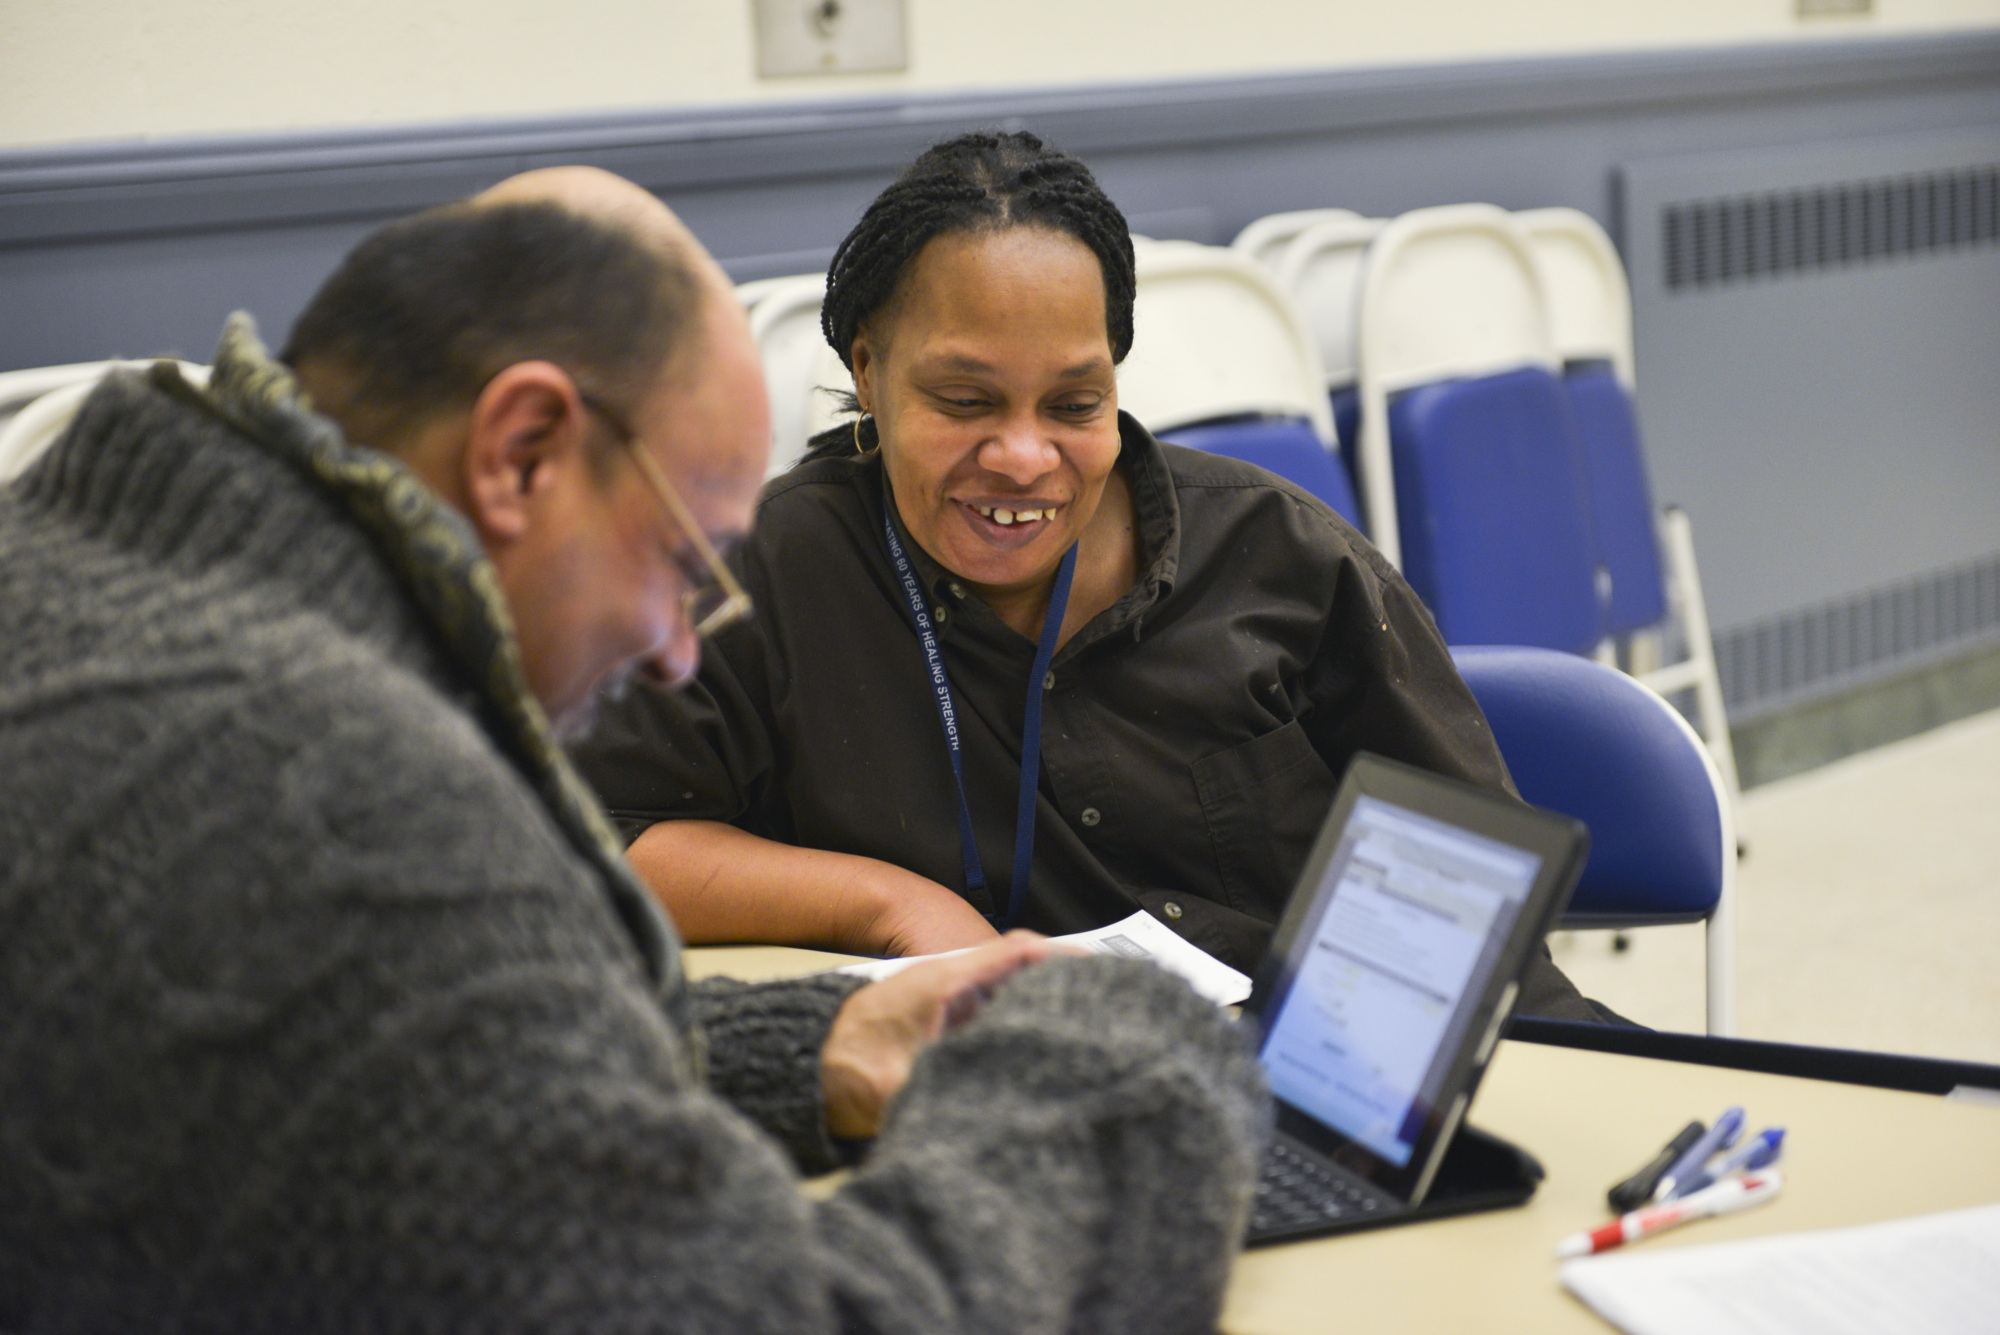 A man and woman look at a computer at a community health event